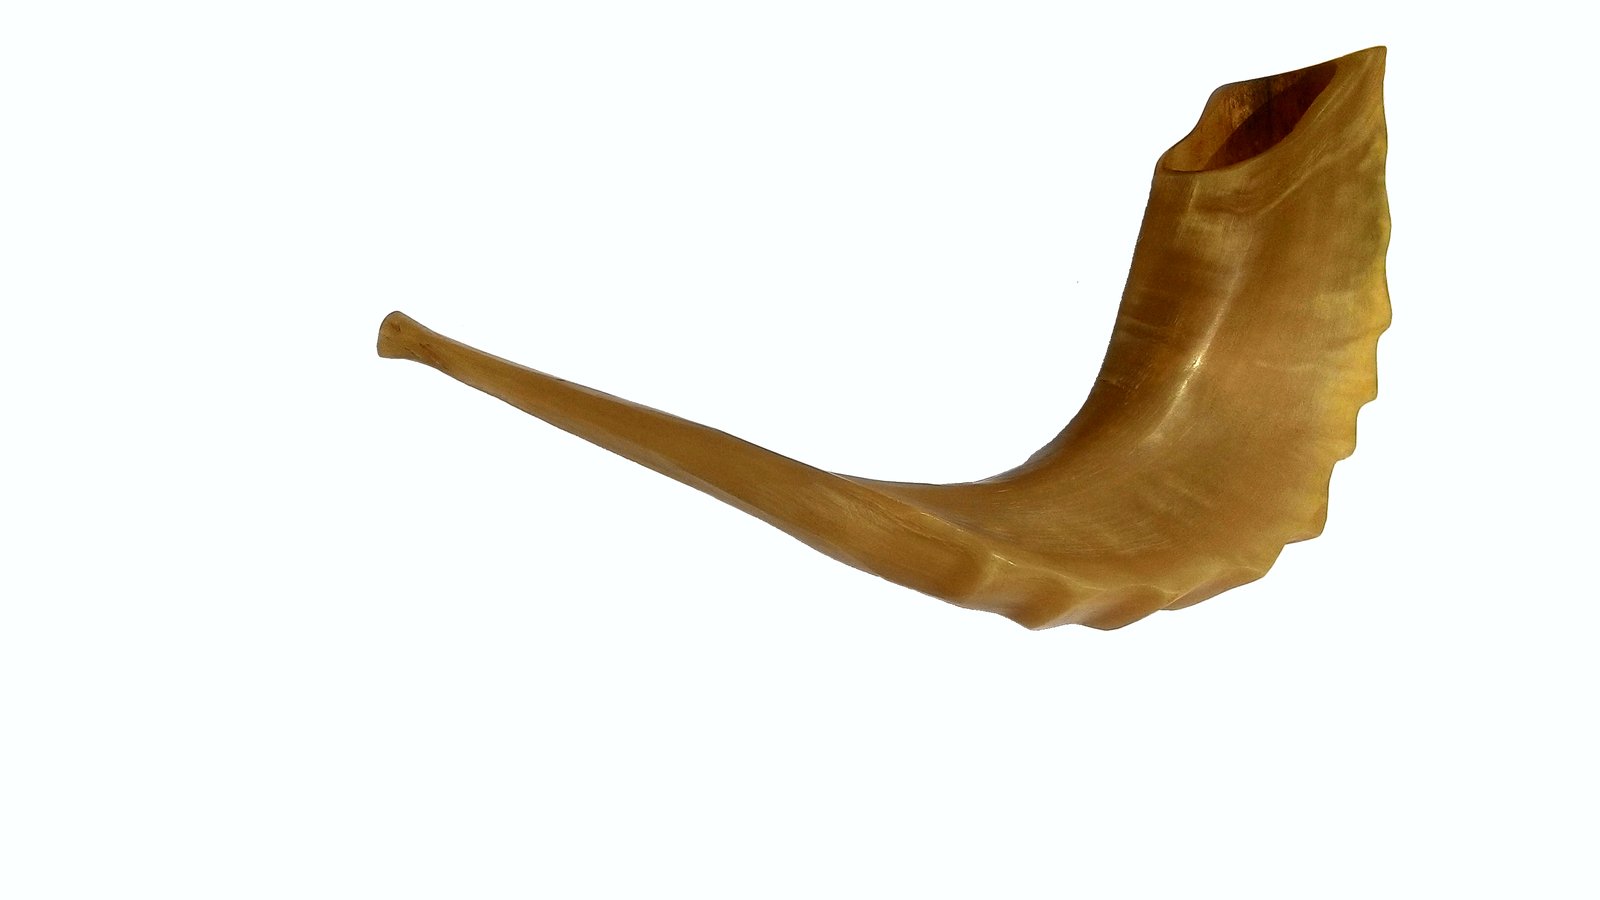 Free Shofar Image, Picture, And Royalty Free